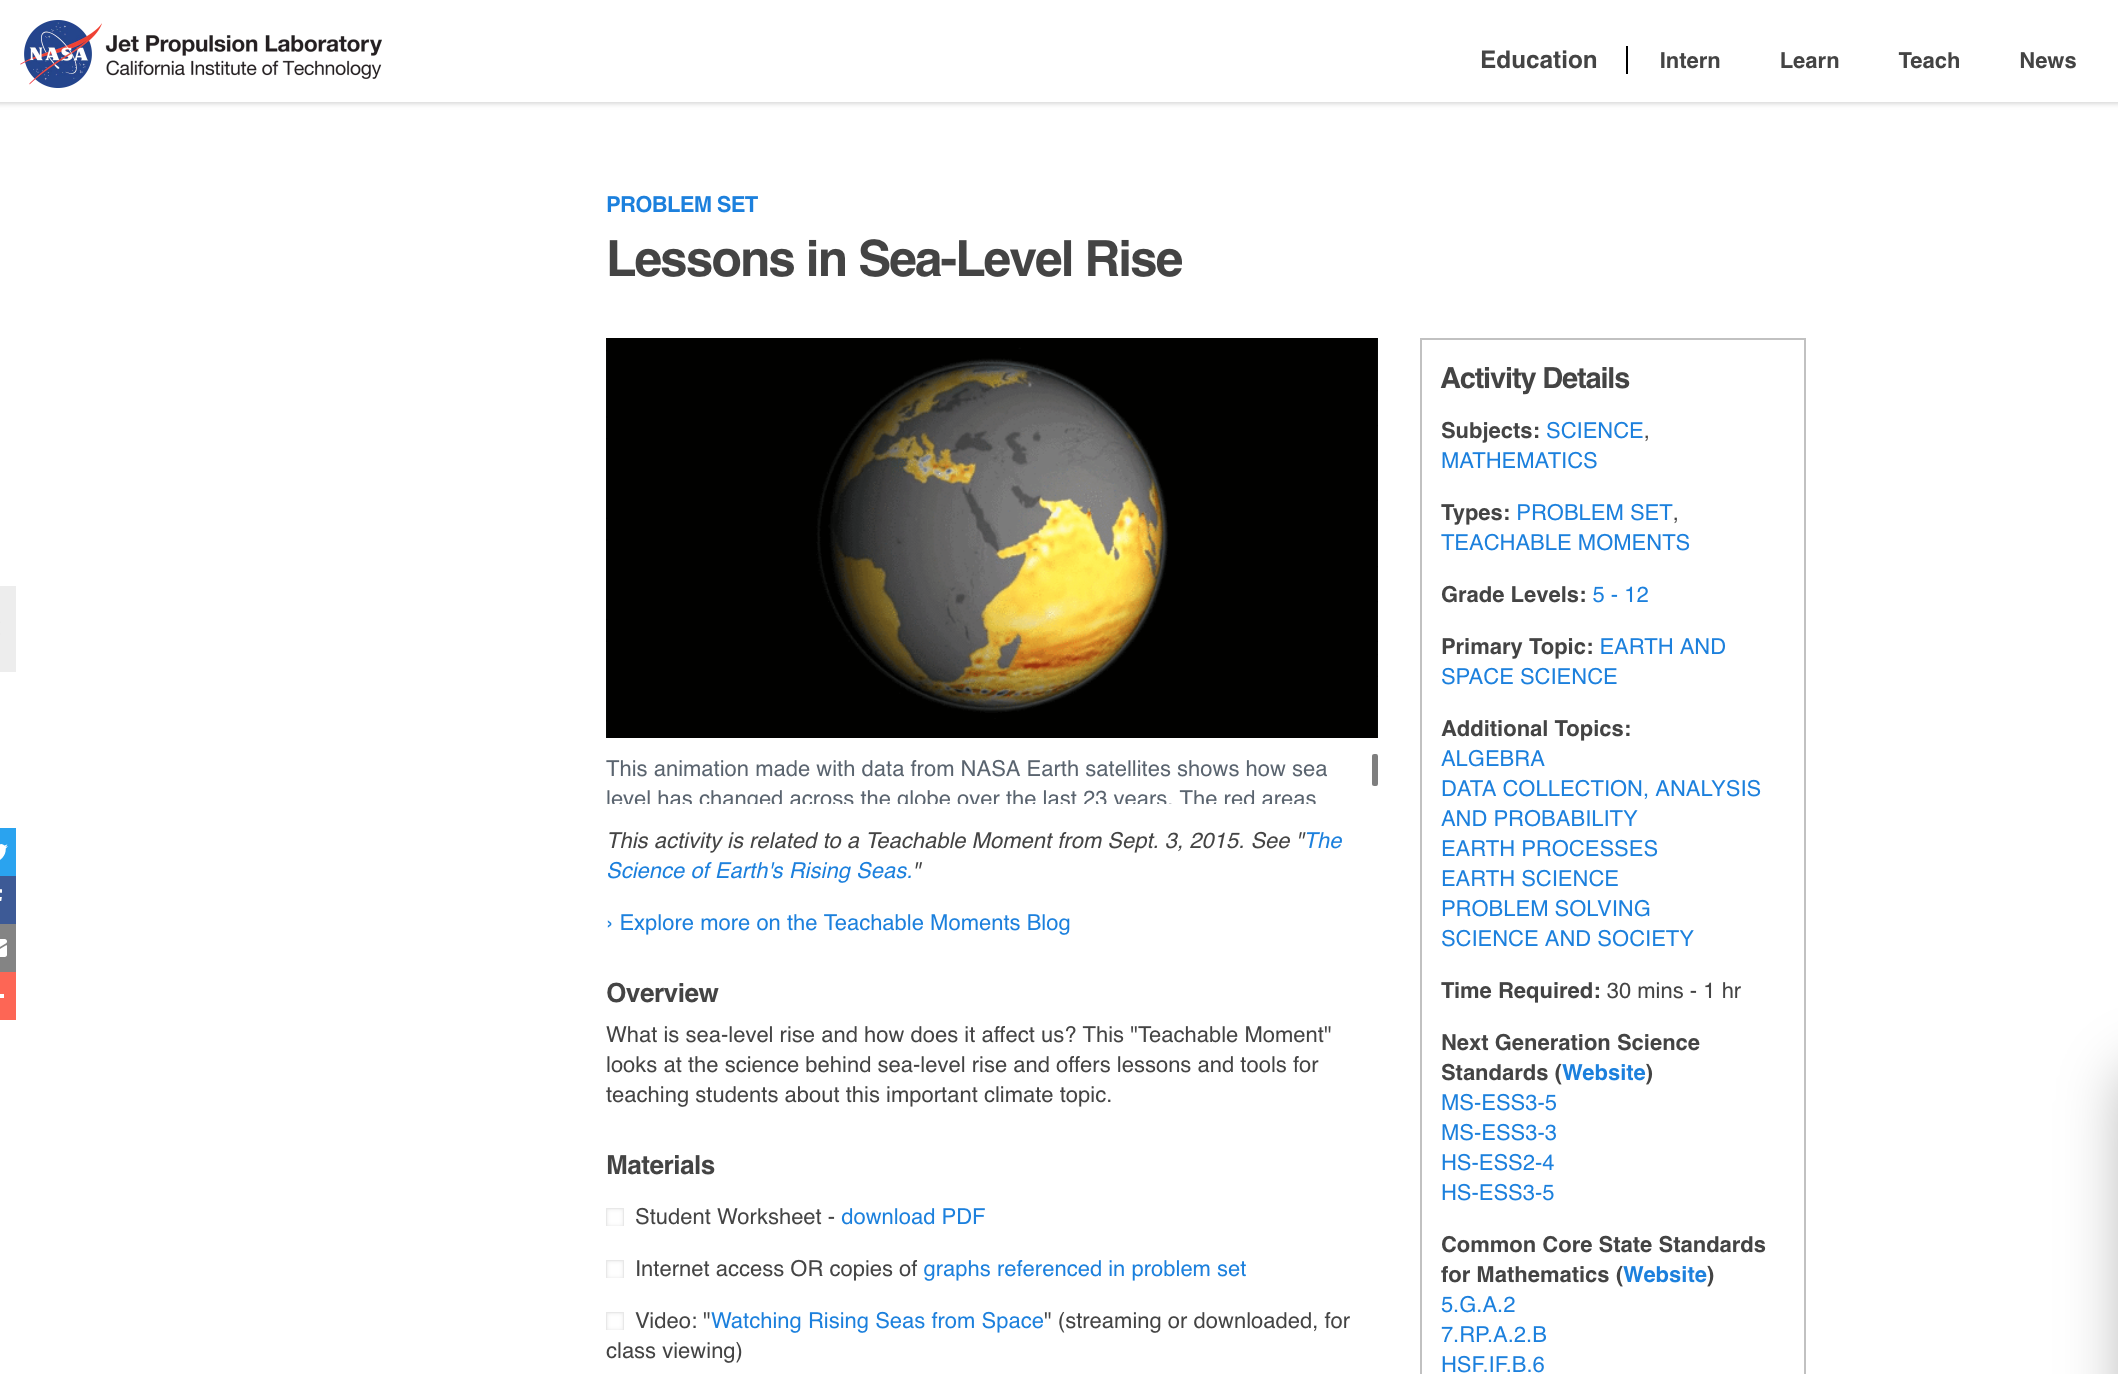 Lessons in Sea-Level Rise